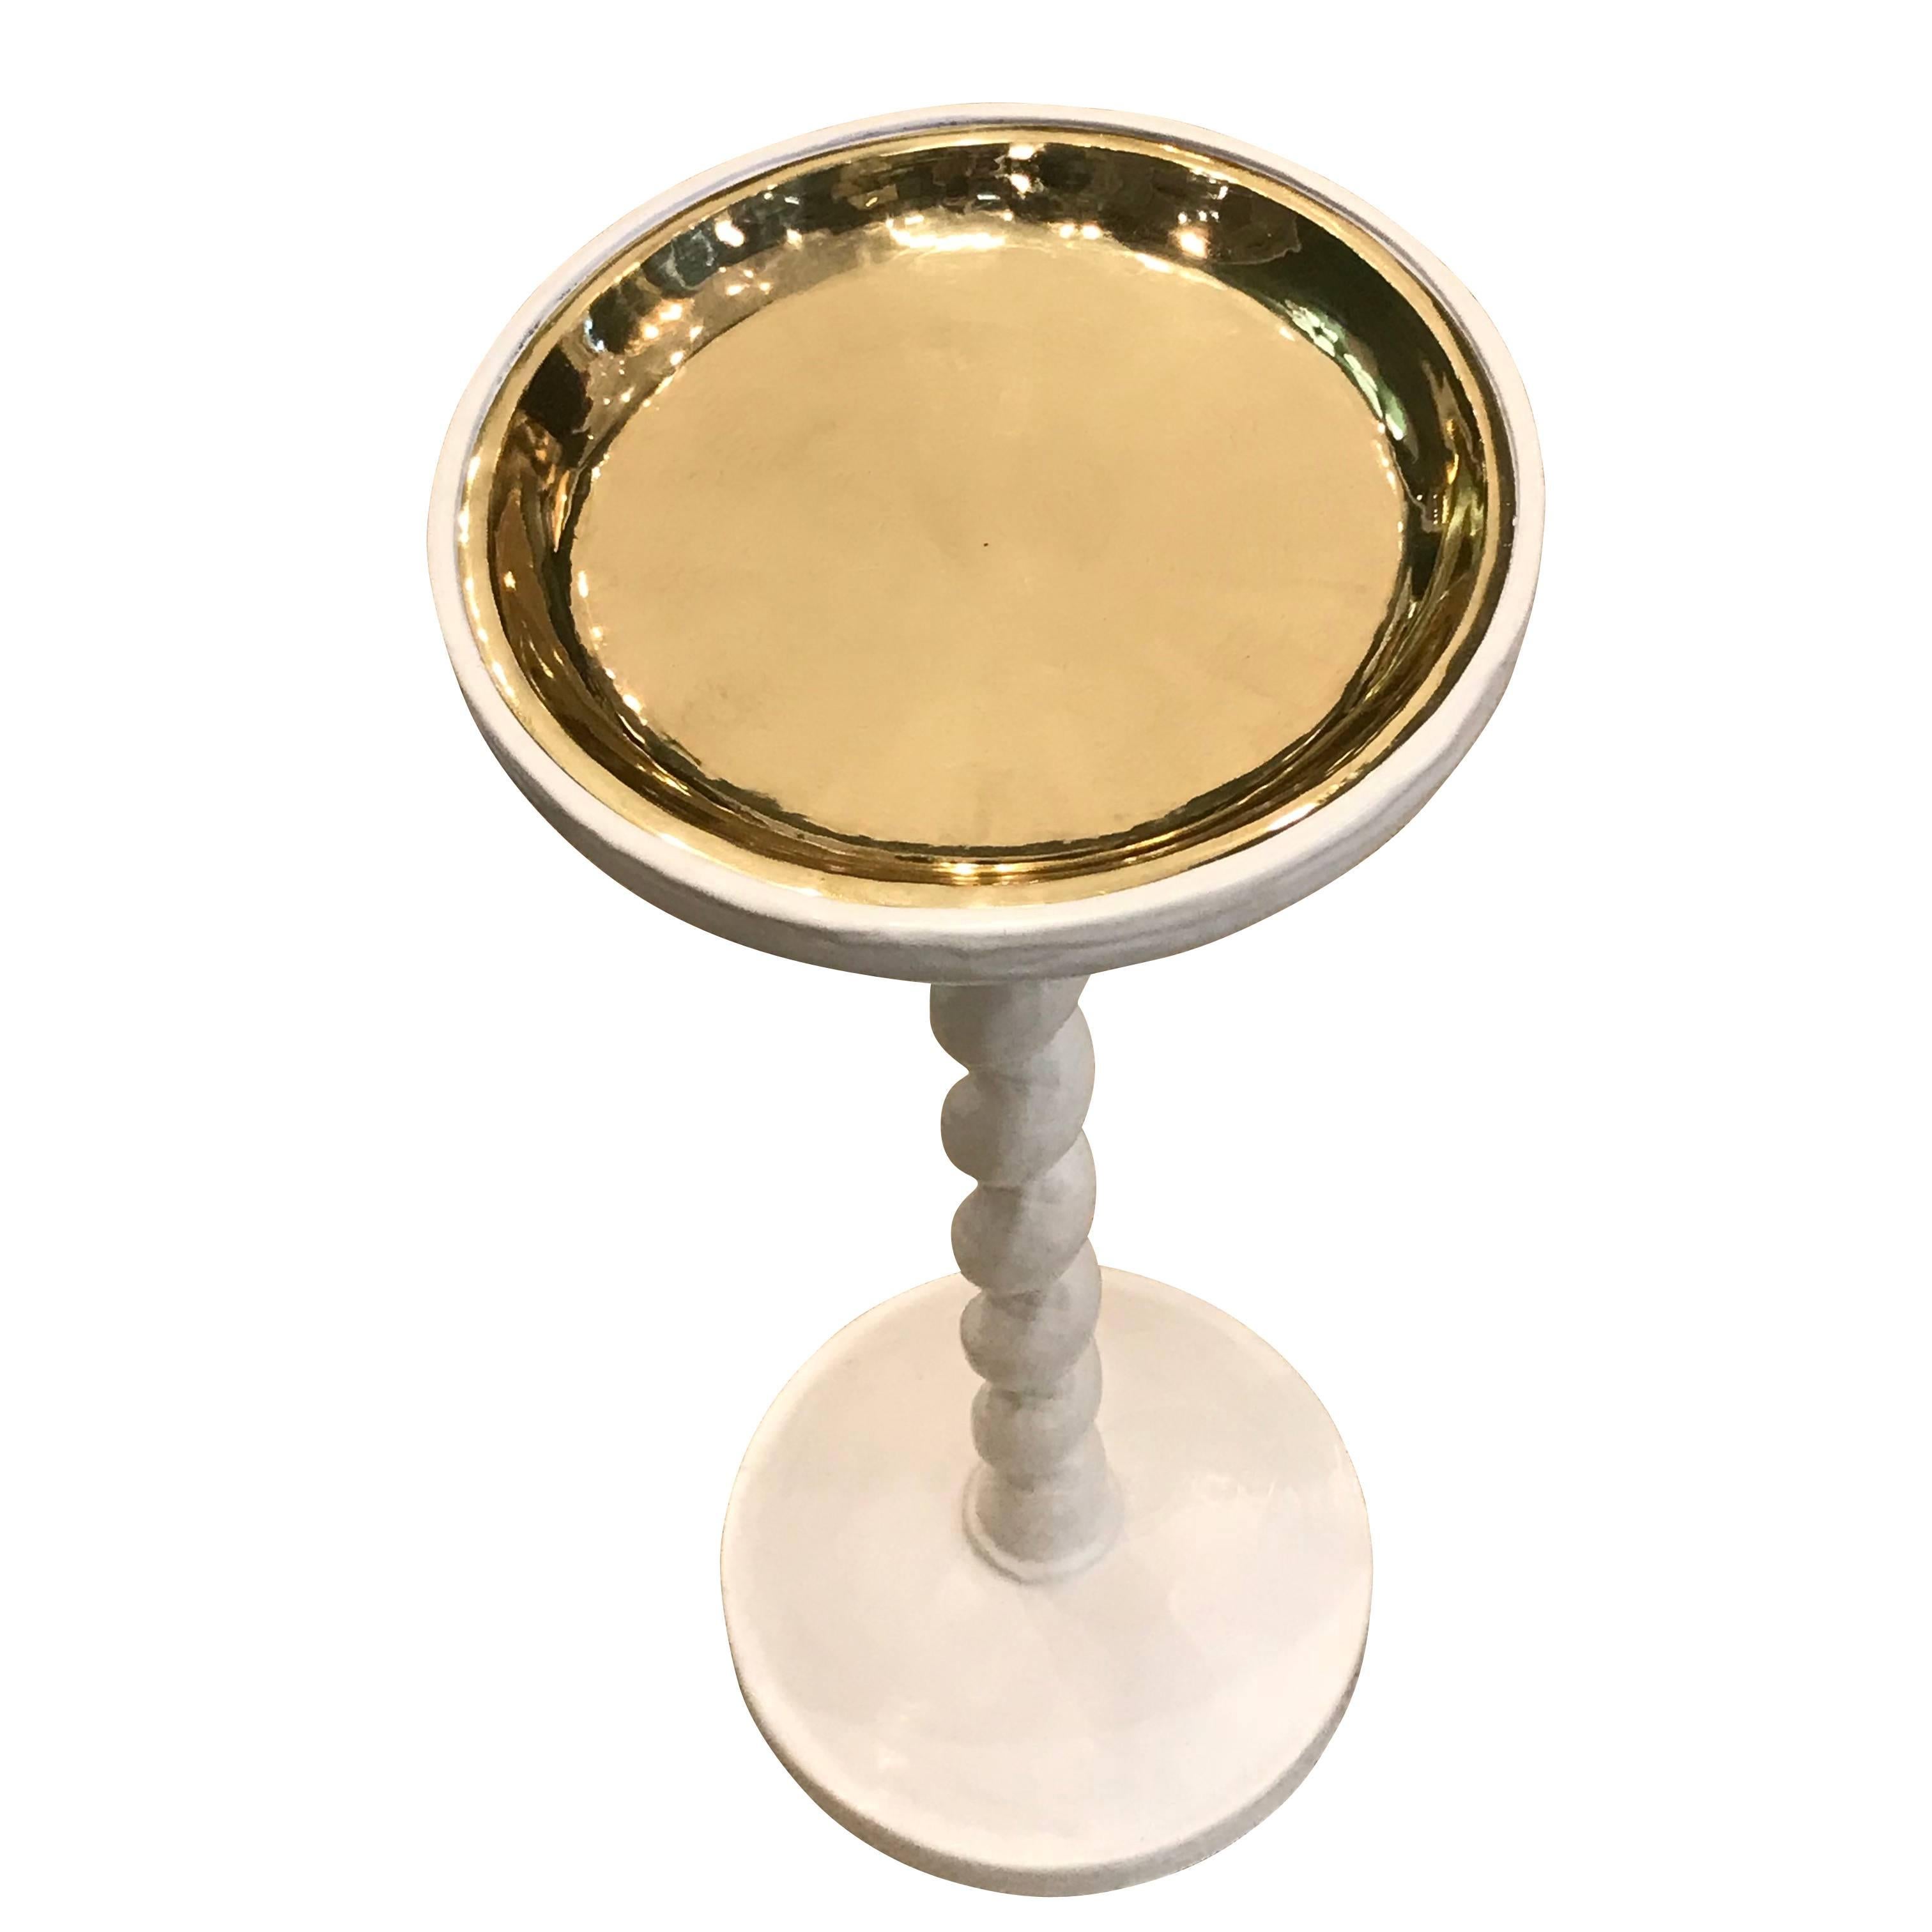 Contemporary English designer Paolo Moschino white plaster cocktail table with metallic gold top.
     